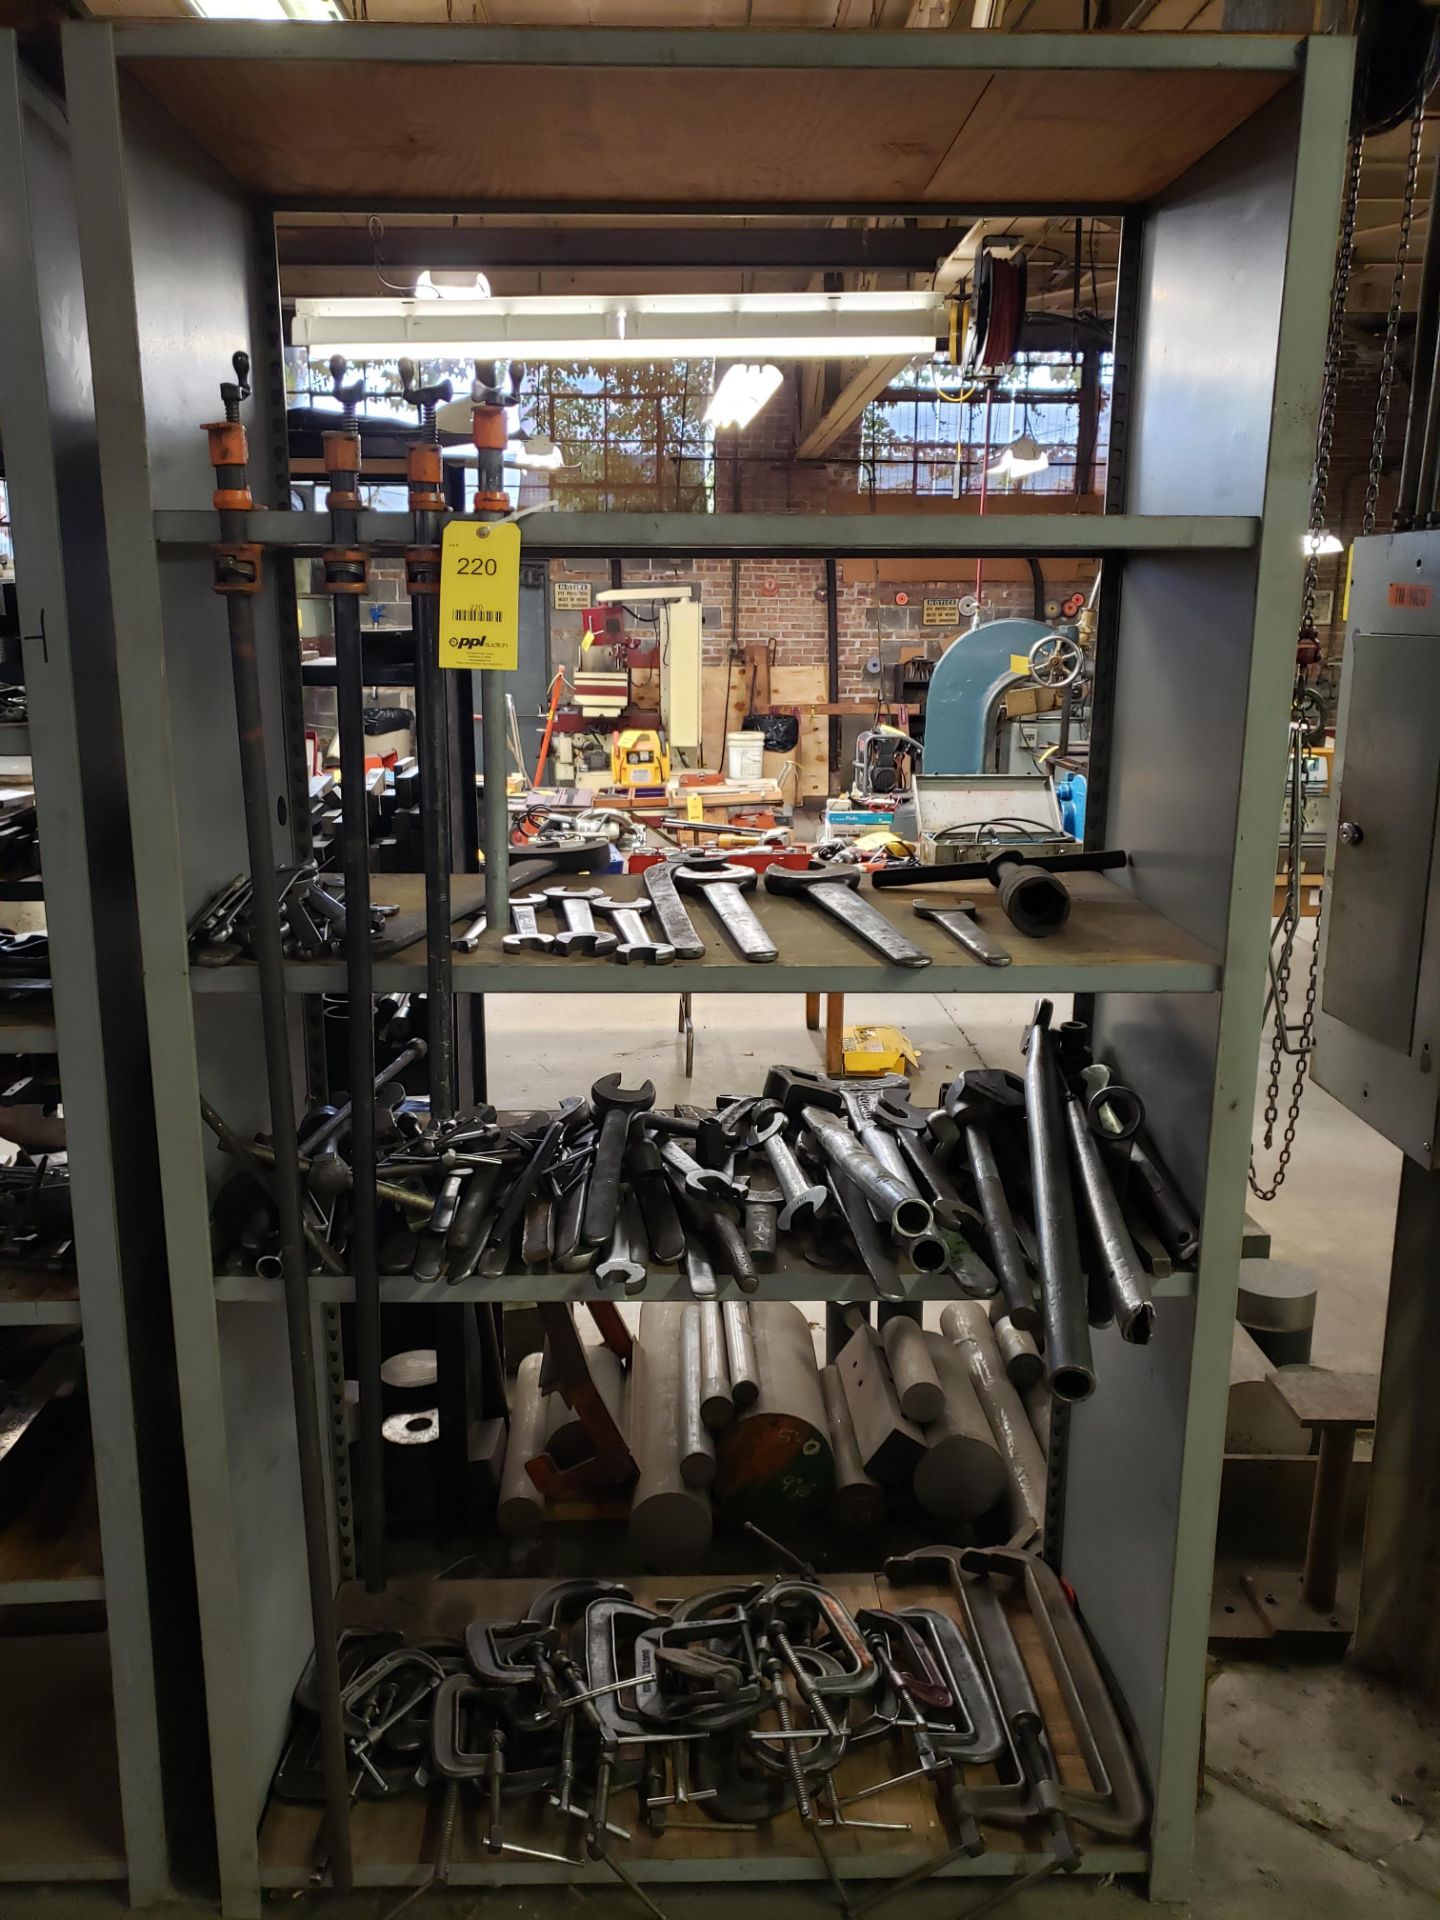 LOT: 7 ft. x 4 ft. Shelf Unit with Large Quantity of Clamps & Wrenches